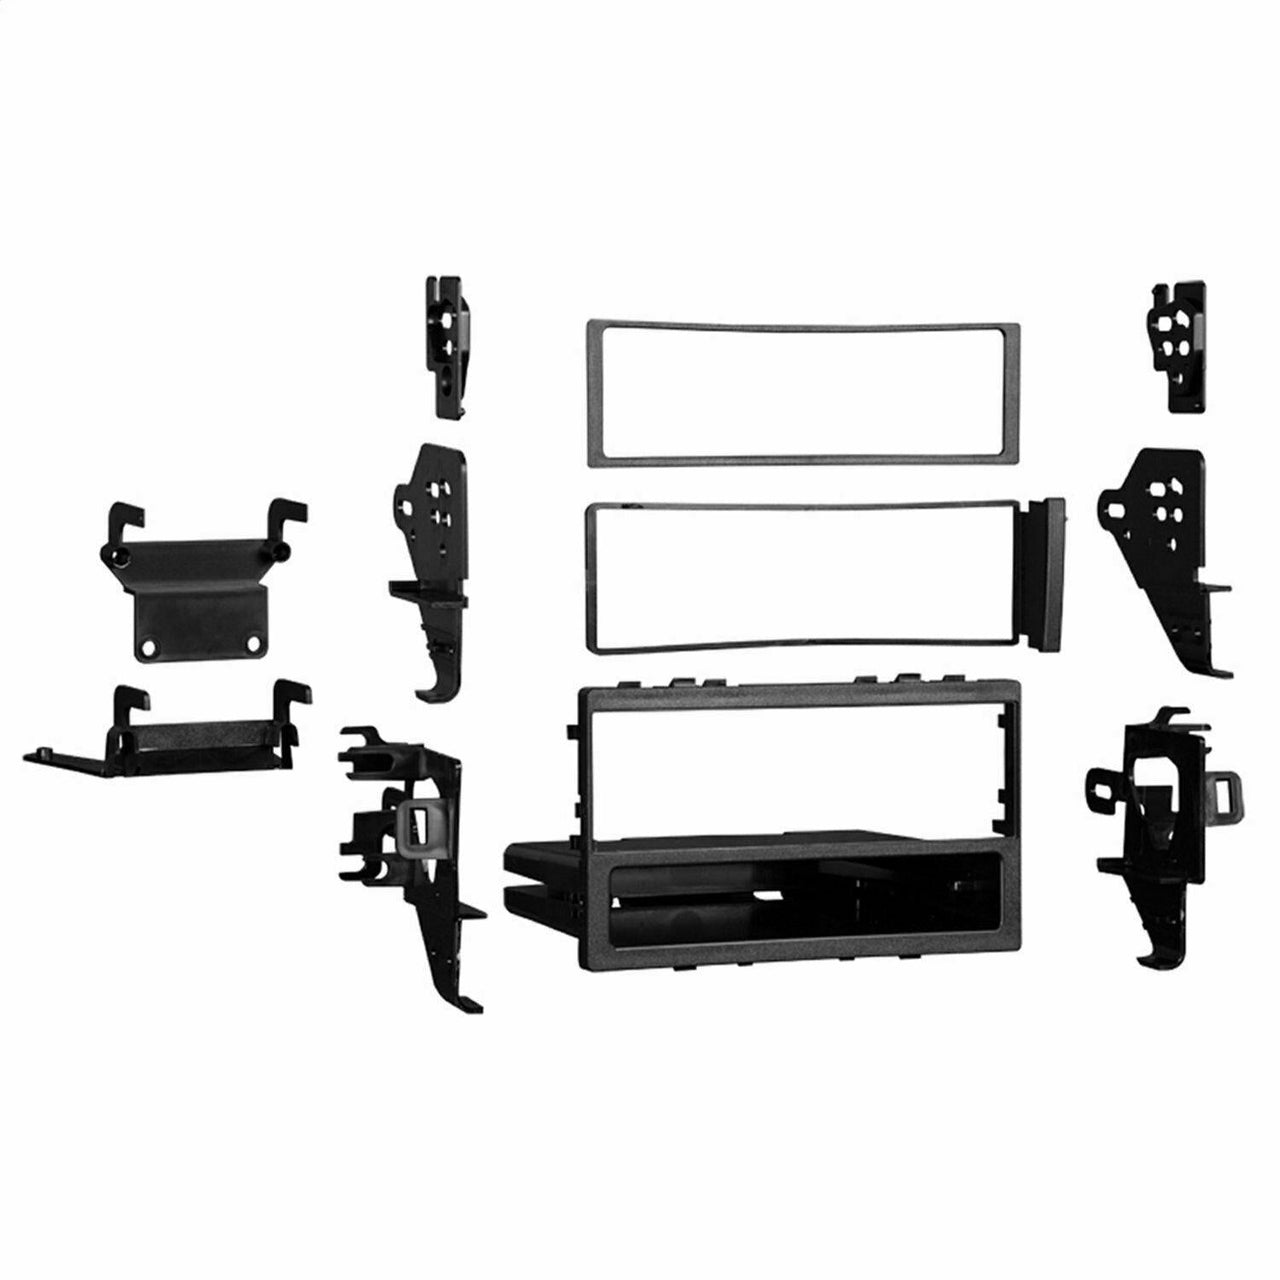 METRA 99-7898 Dash Installation Kit For Honda and Acura 88-Up